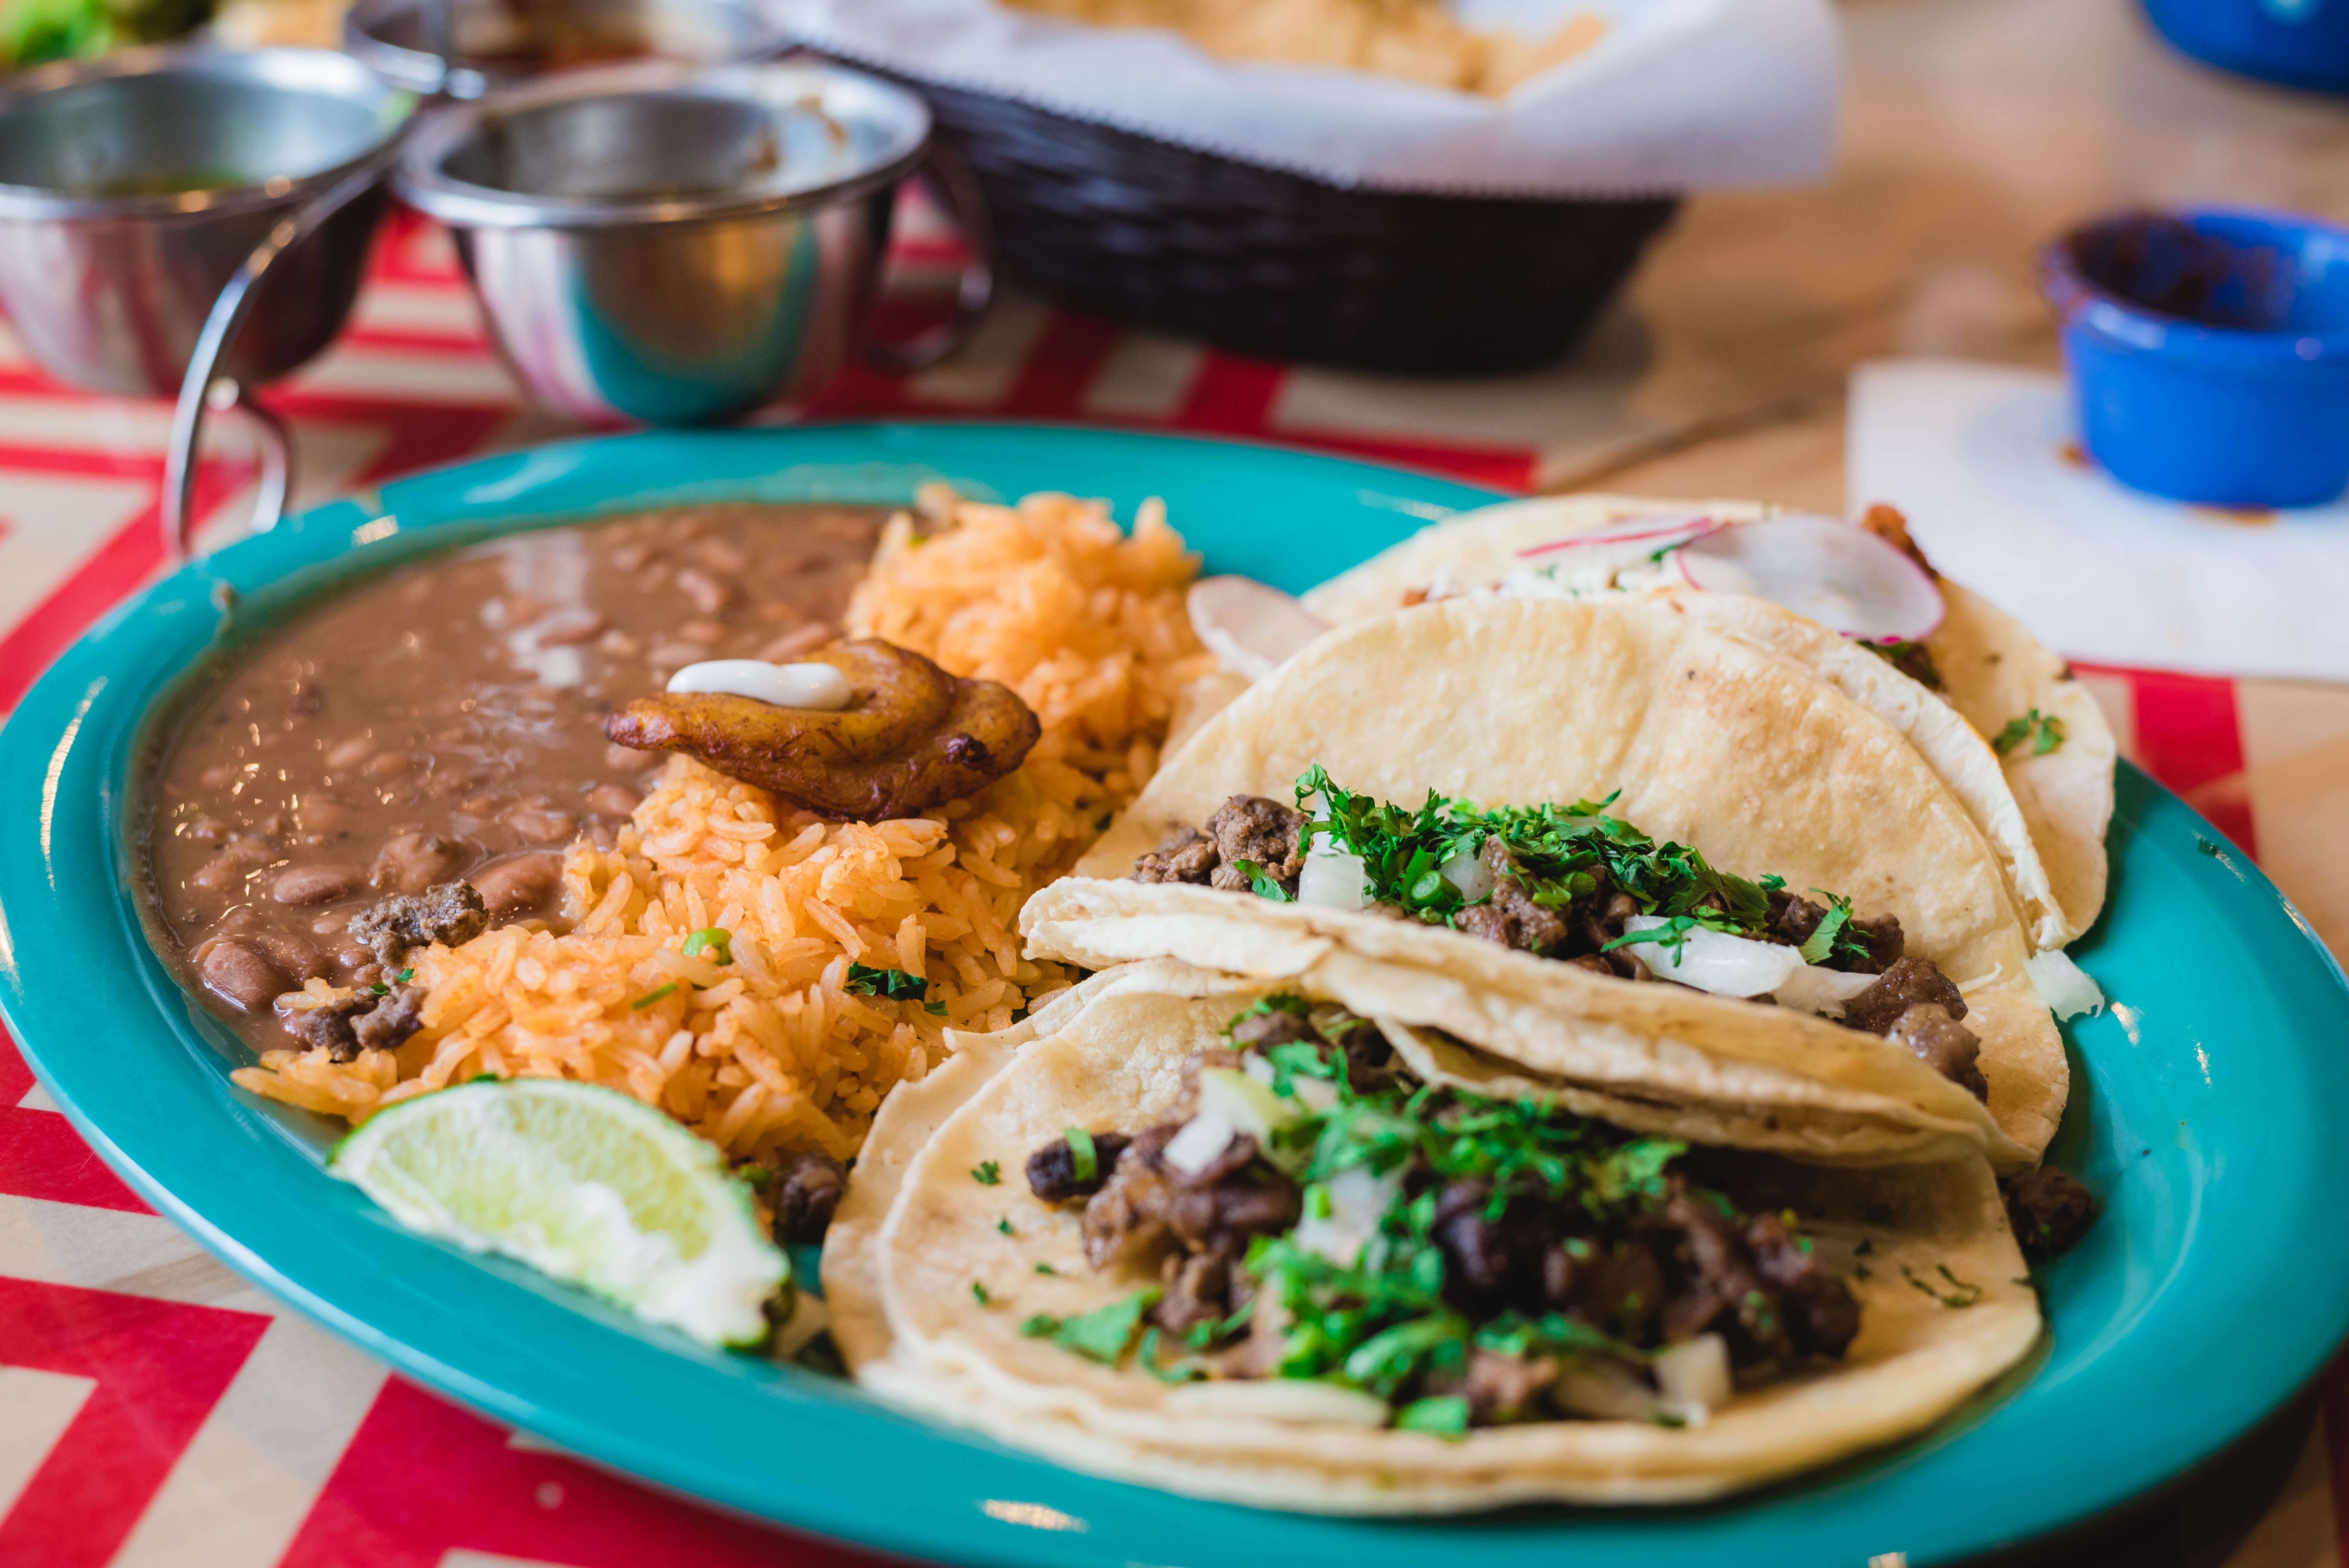 What's The Best Way To Tell If A Mexican Restaurant Is Authentic